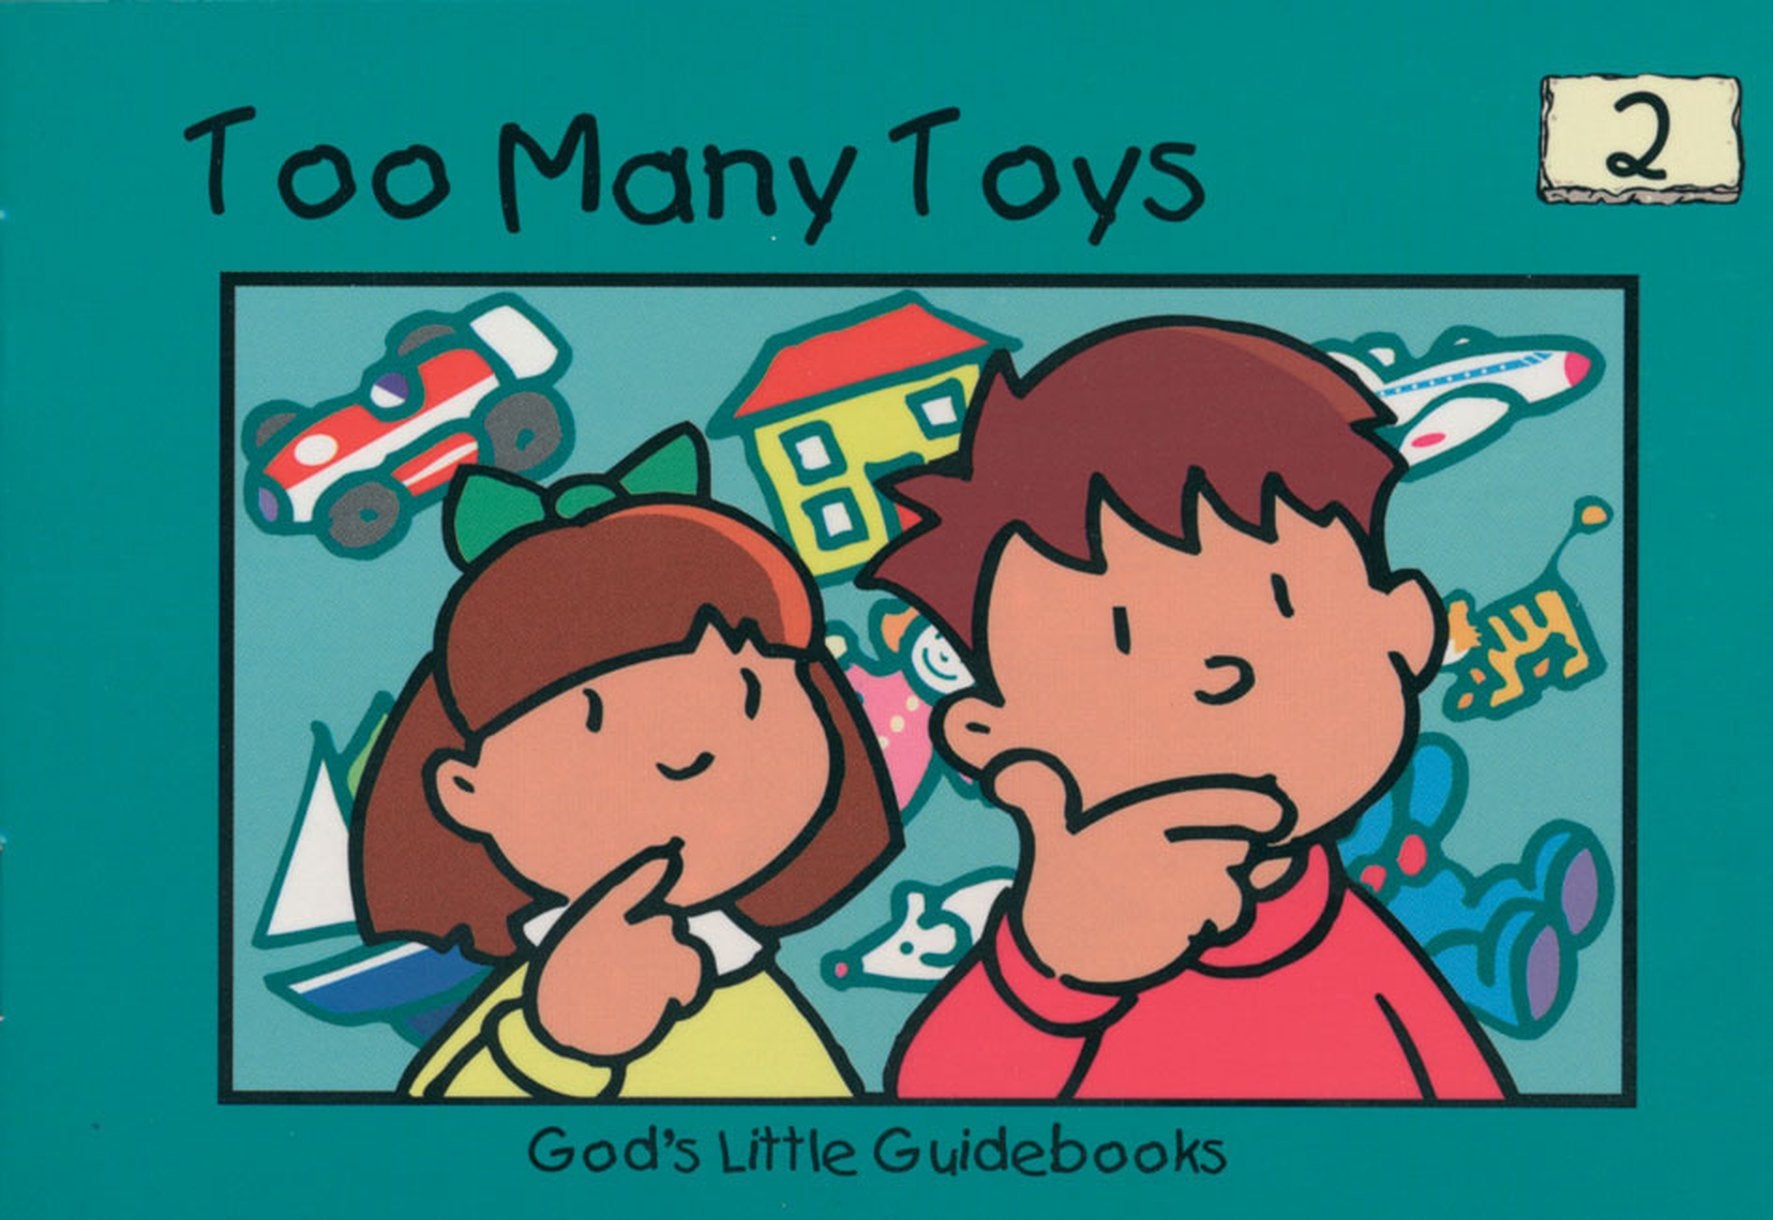 Image of Too Many Toys other